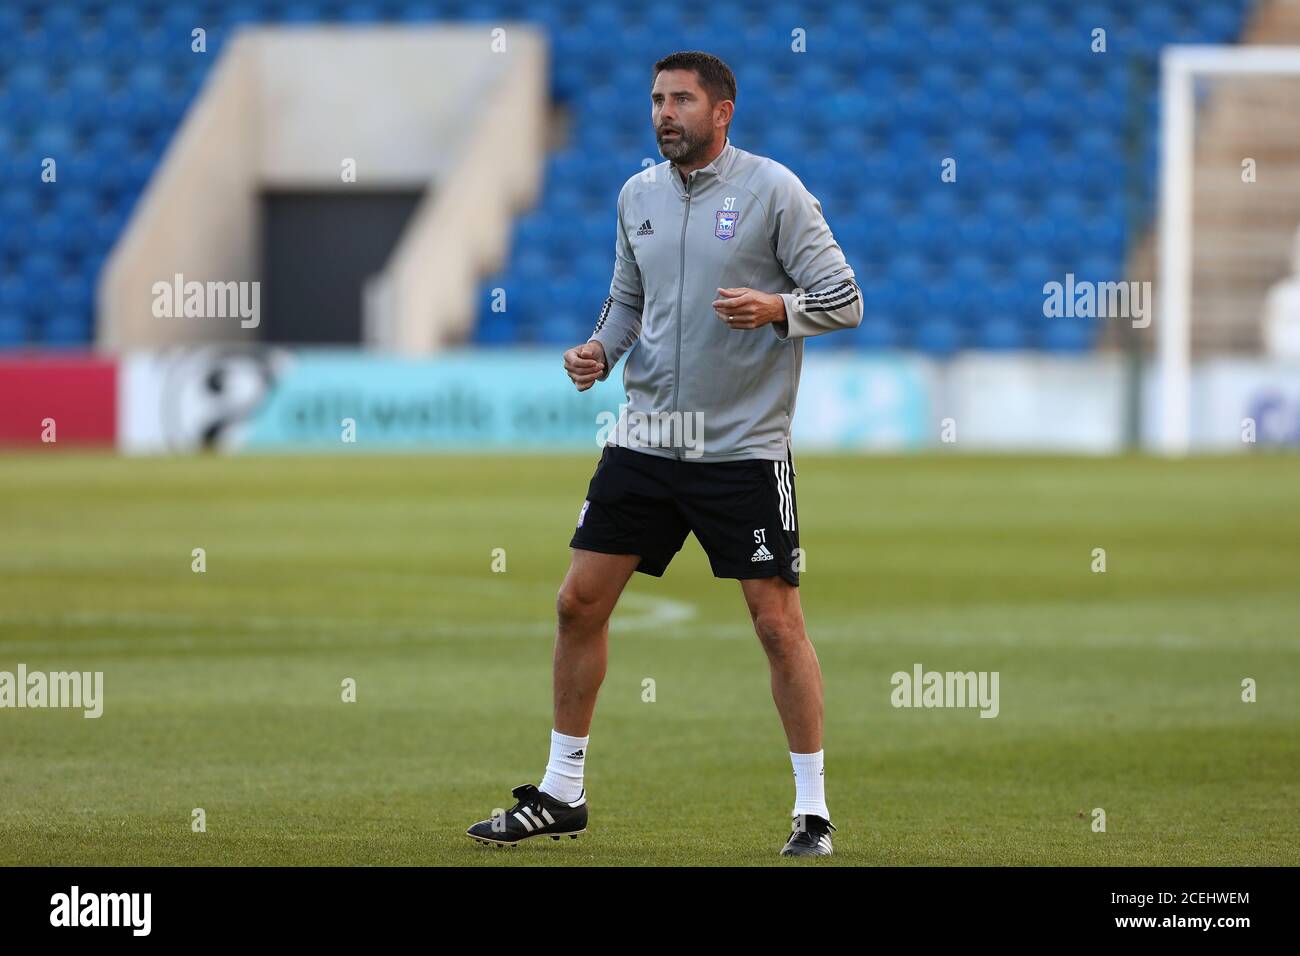 Assistant Manager of Ipswich Town, Stuart Taylor - Colchester United v Ipswich Town, Pre-Season Friendly, JobServe Community Stadium, Colchester, UK - 18th August 2020  Editorial Use Only. Stock Photo